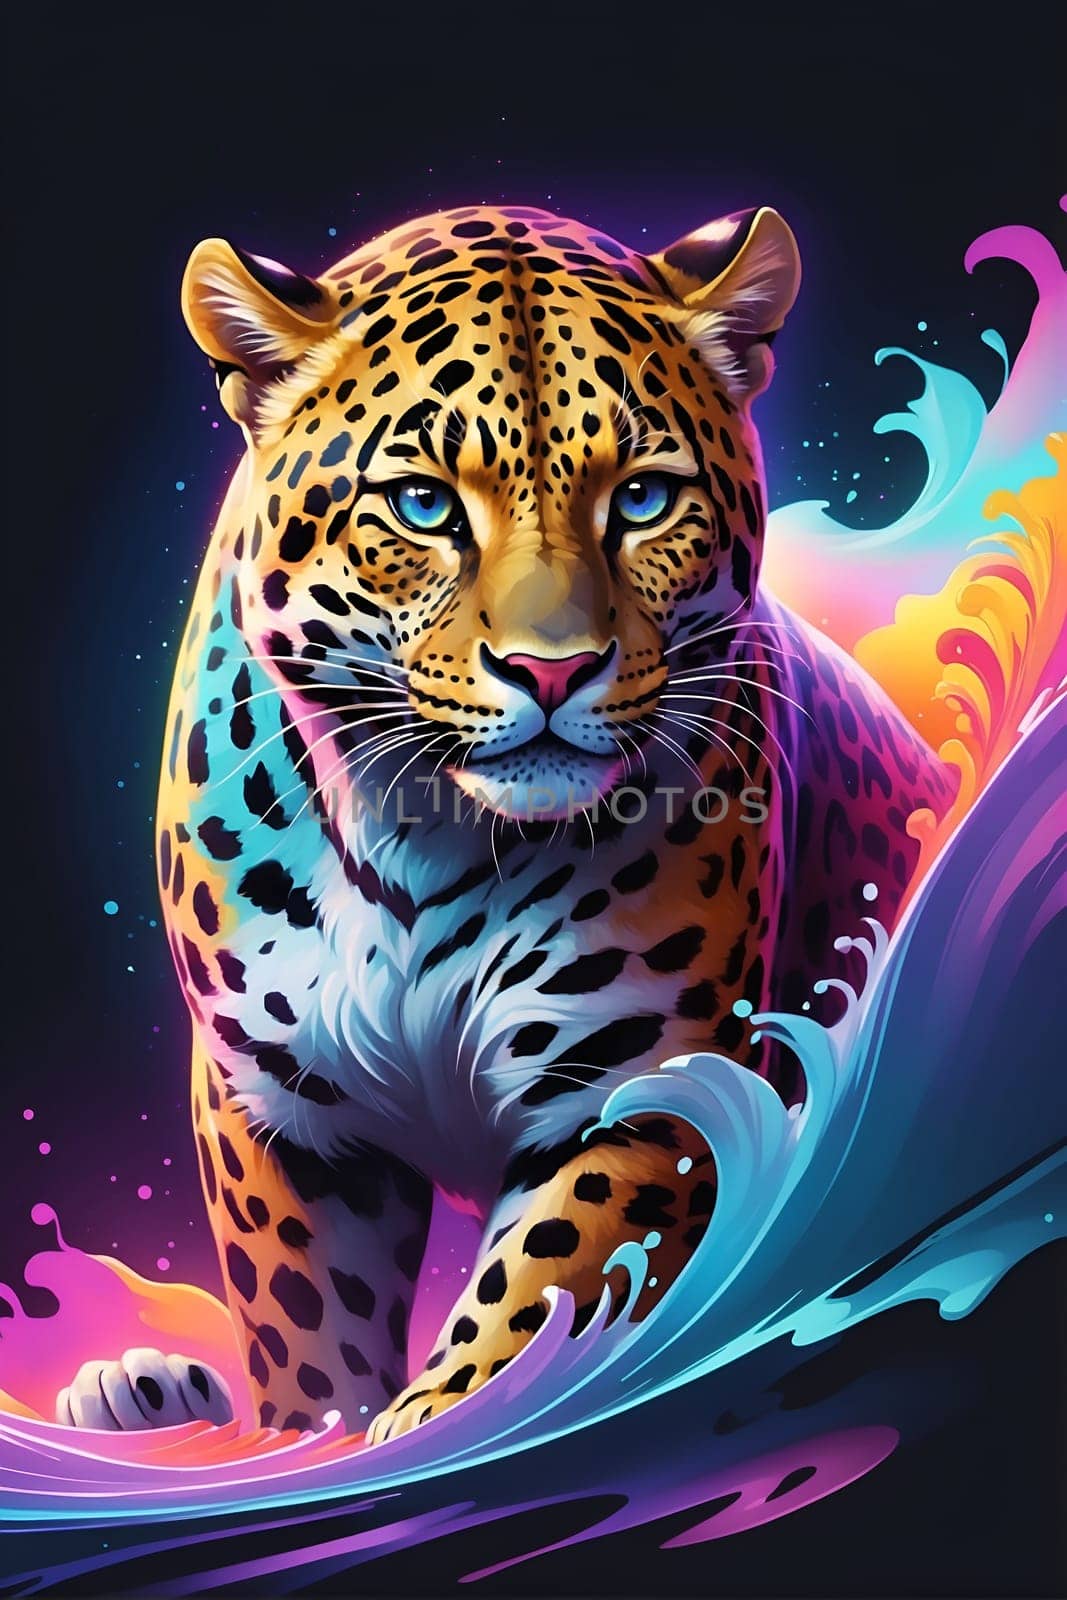 A striking painting of a leopard against a solid black background, showcasing the beauty and power of this majestic creature.